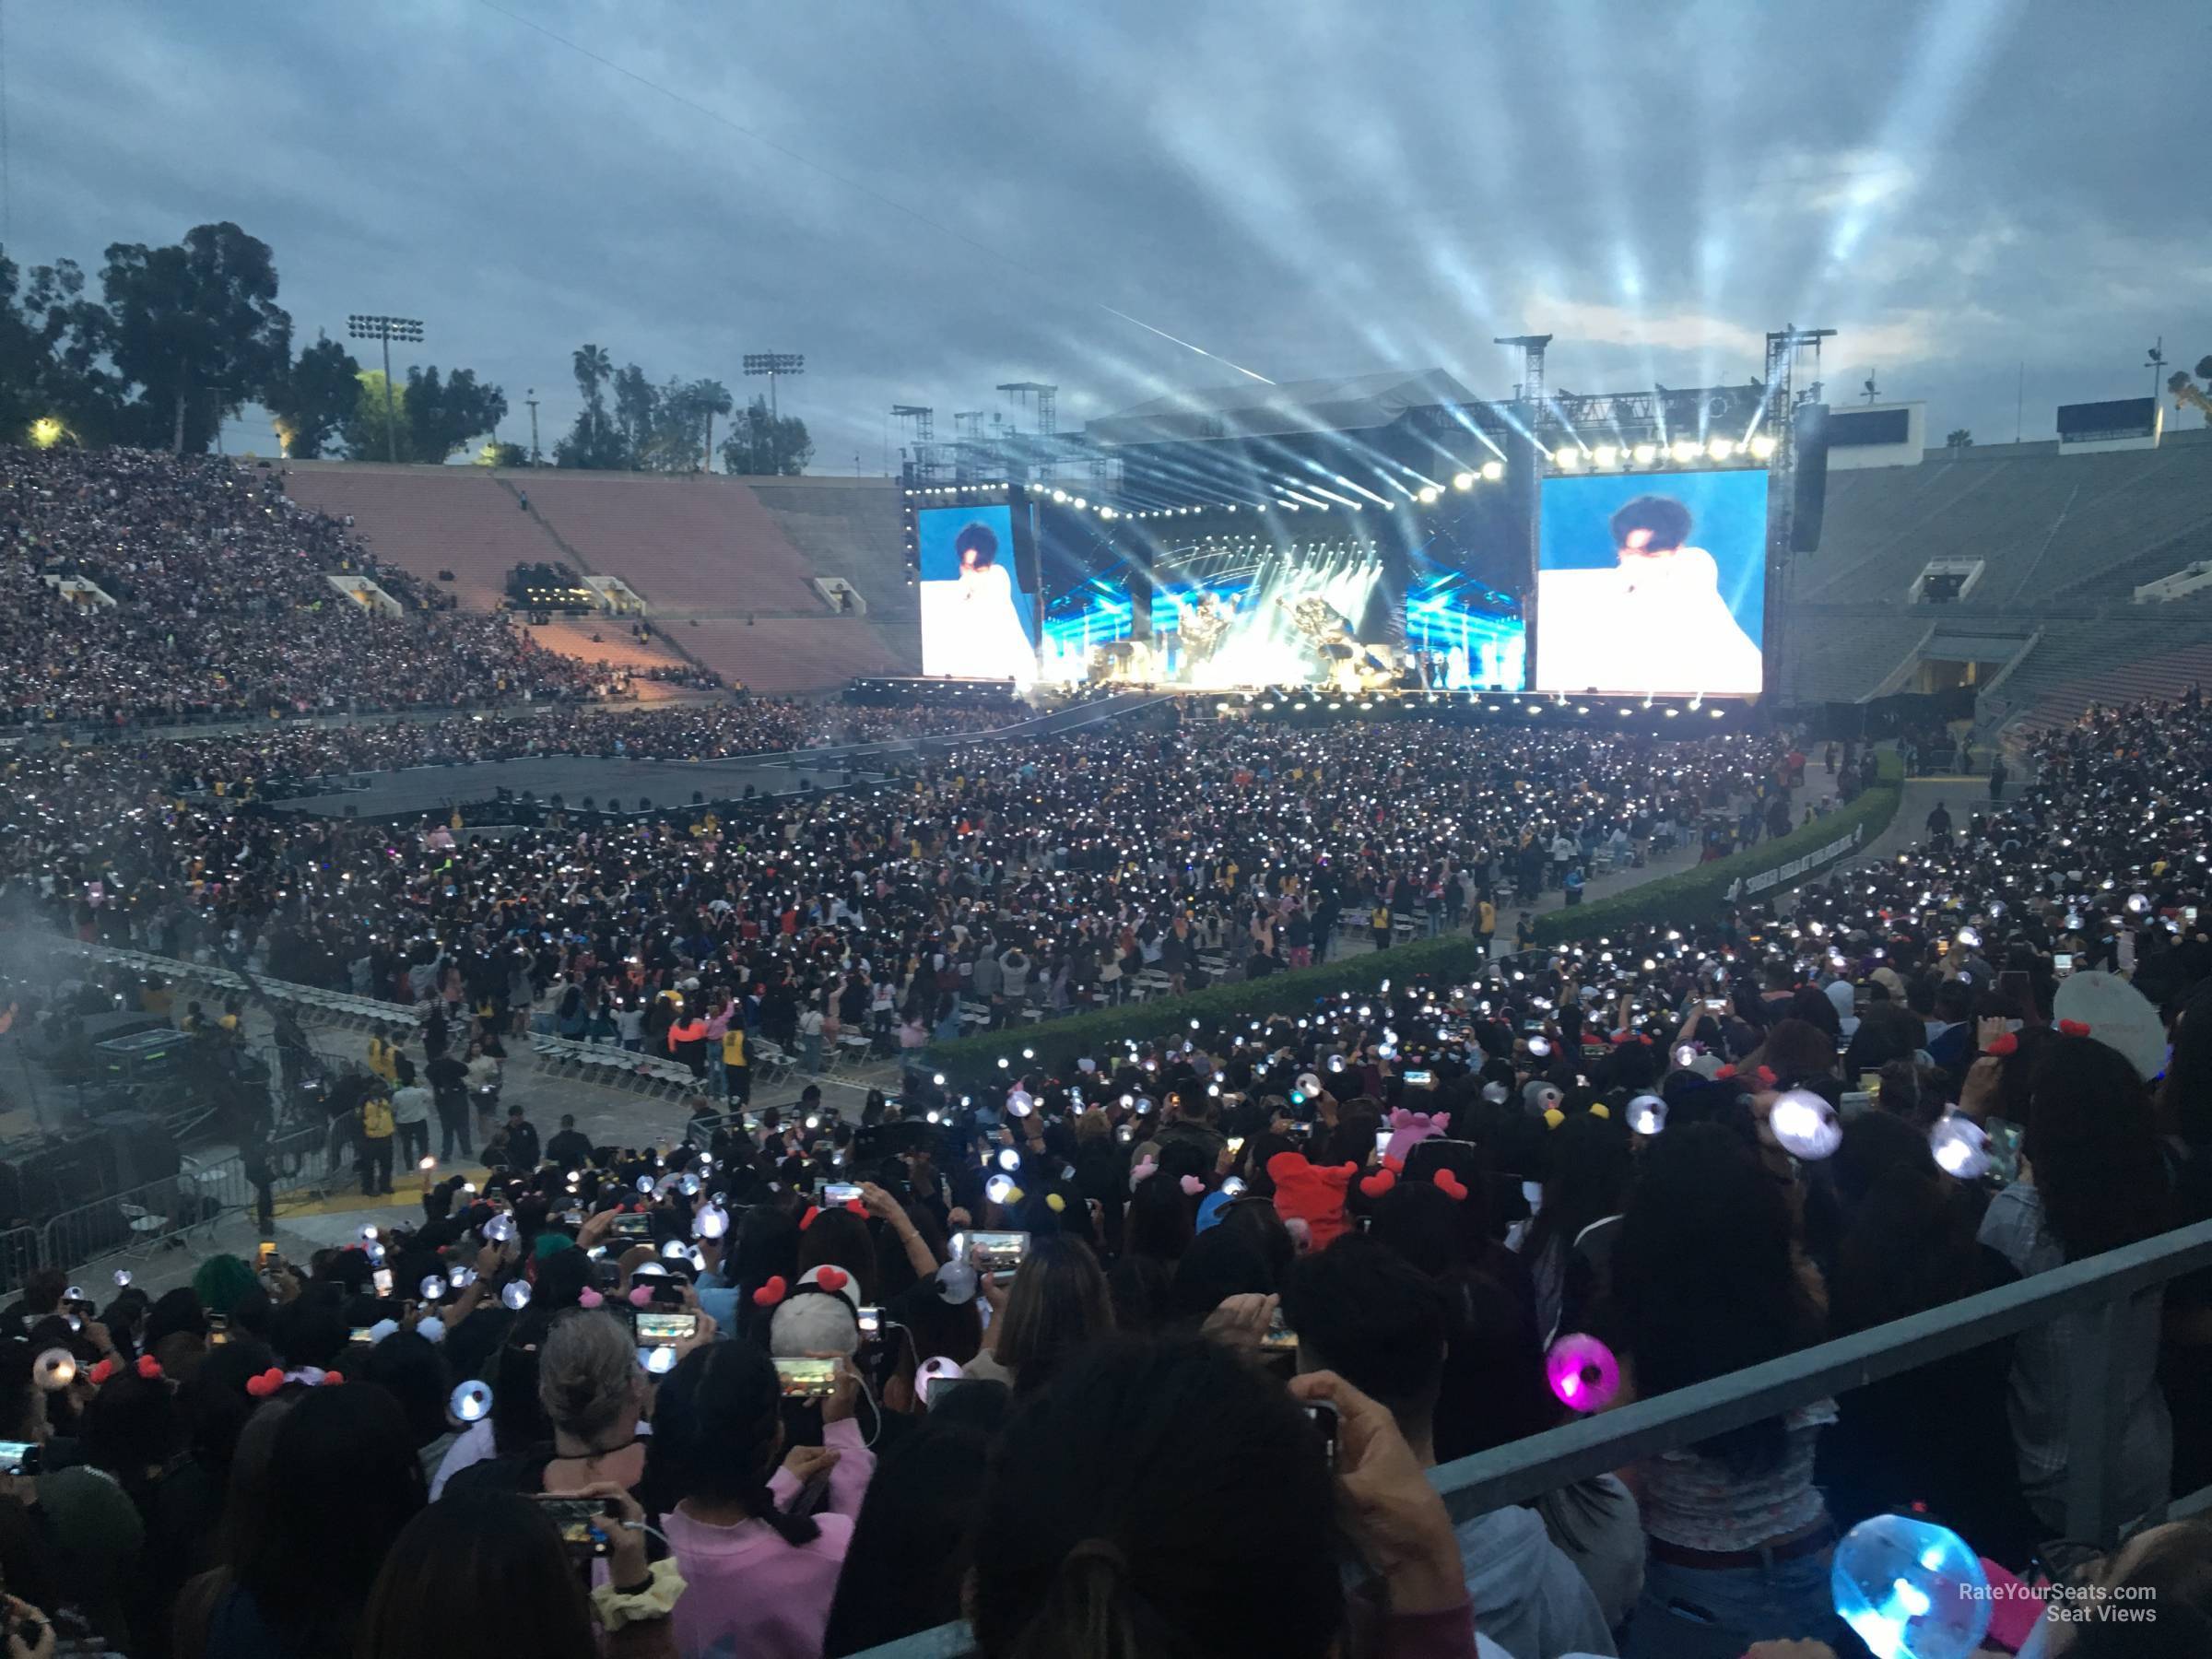 section 16, row 30 seat view  for concert - rose bowl stadium